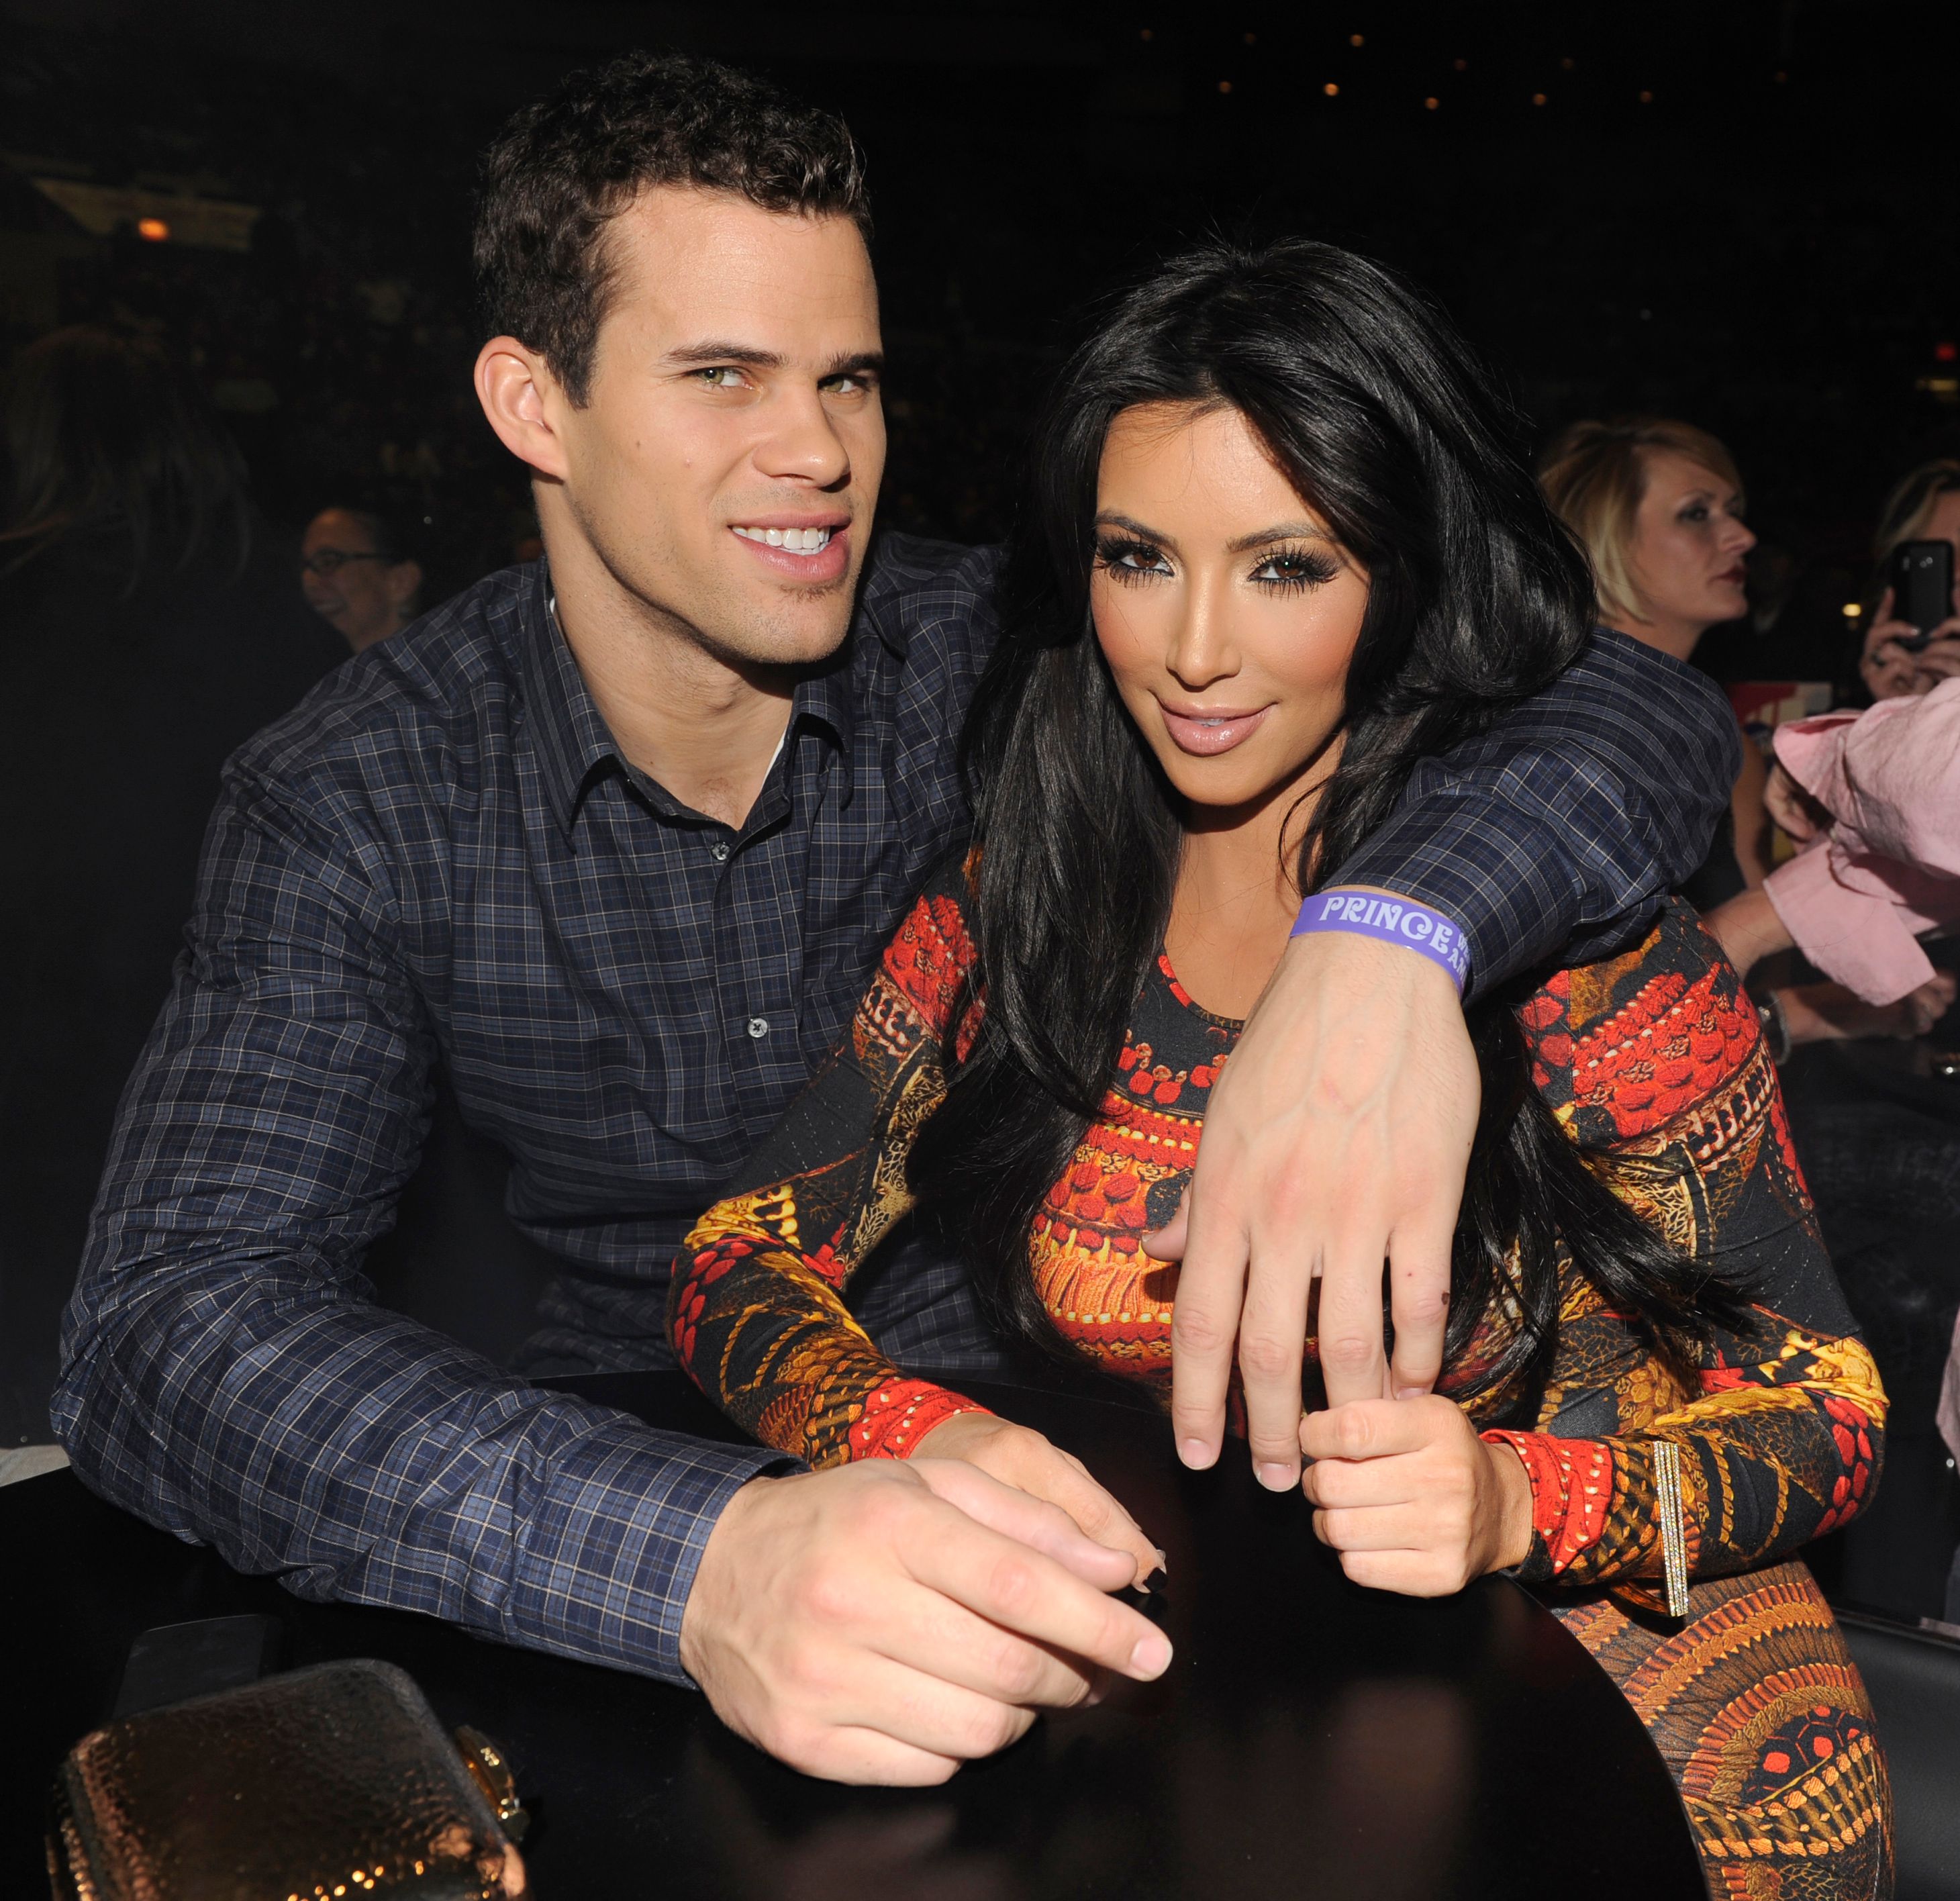  Kris Humphries and Kim Kardashian at Prince's "Welcome 2 America" performance in 2011 in New York City | Photo: Getty Images